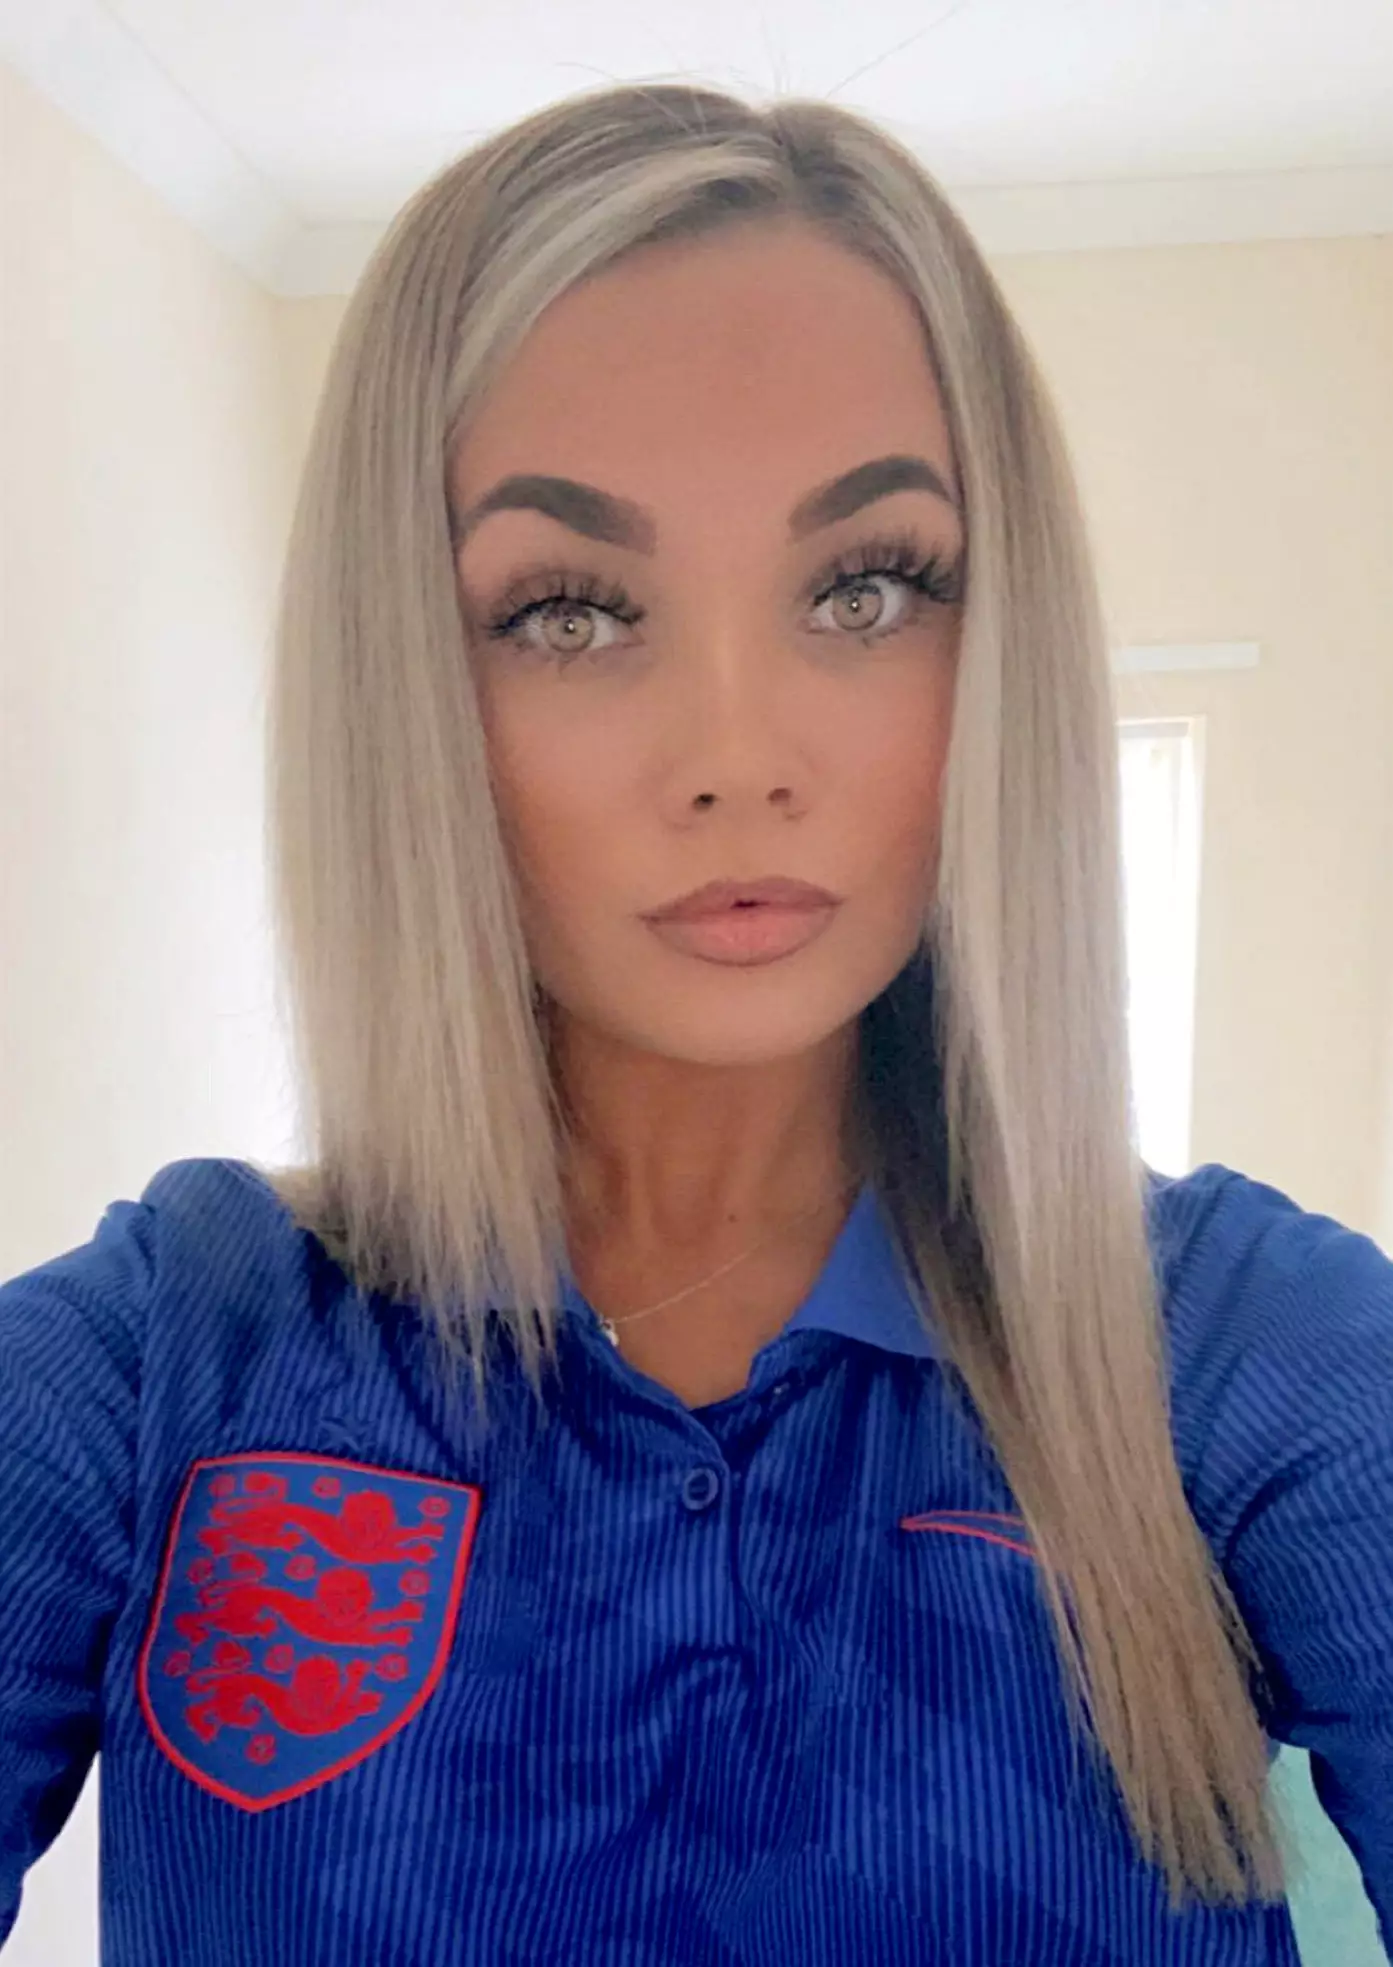 She's got a plan to 'fix' the tattoo if England lose the final.